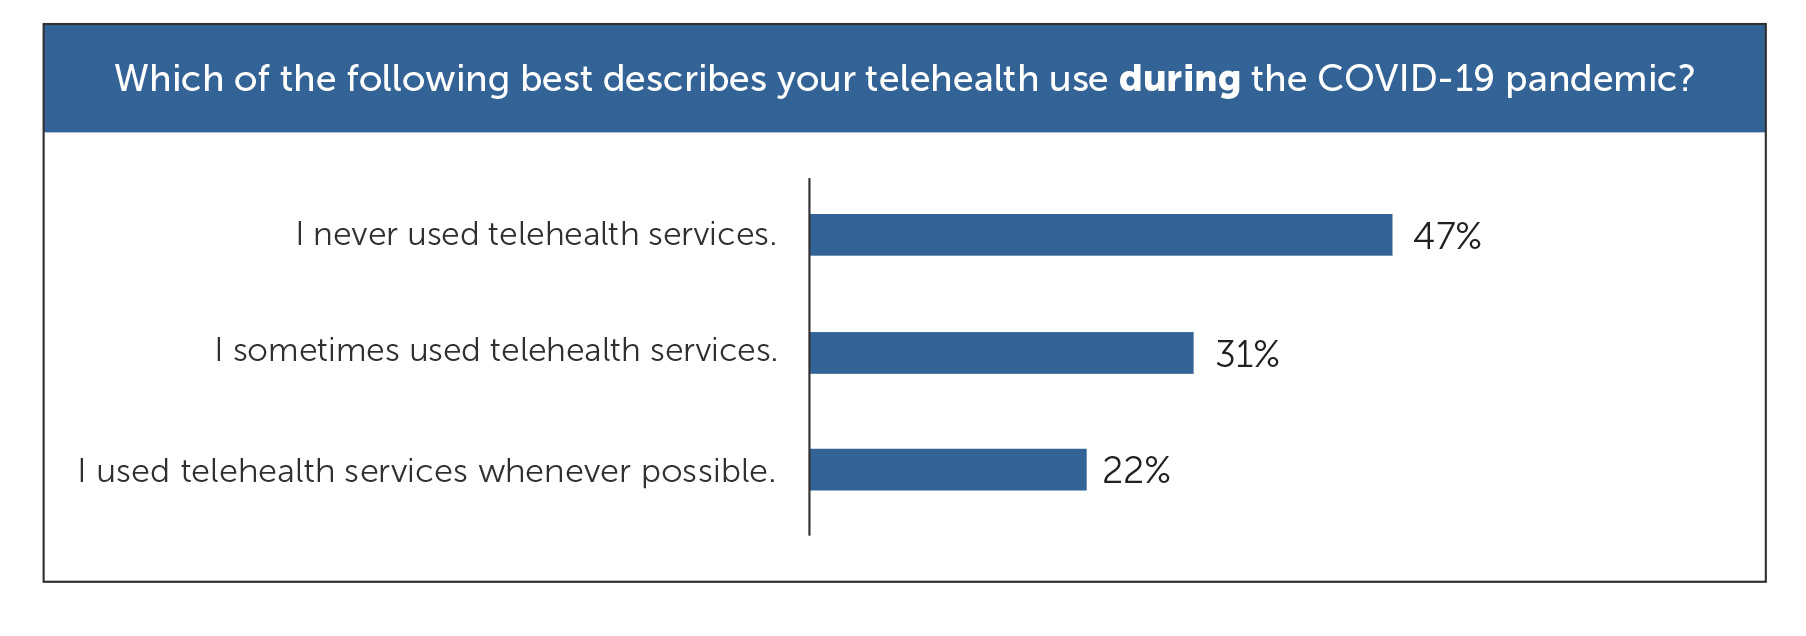 Telehealth during to COVID-19